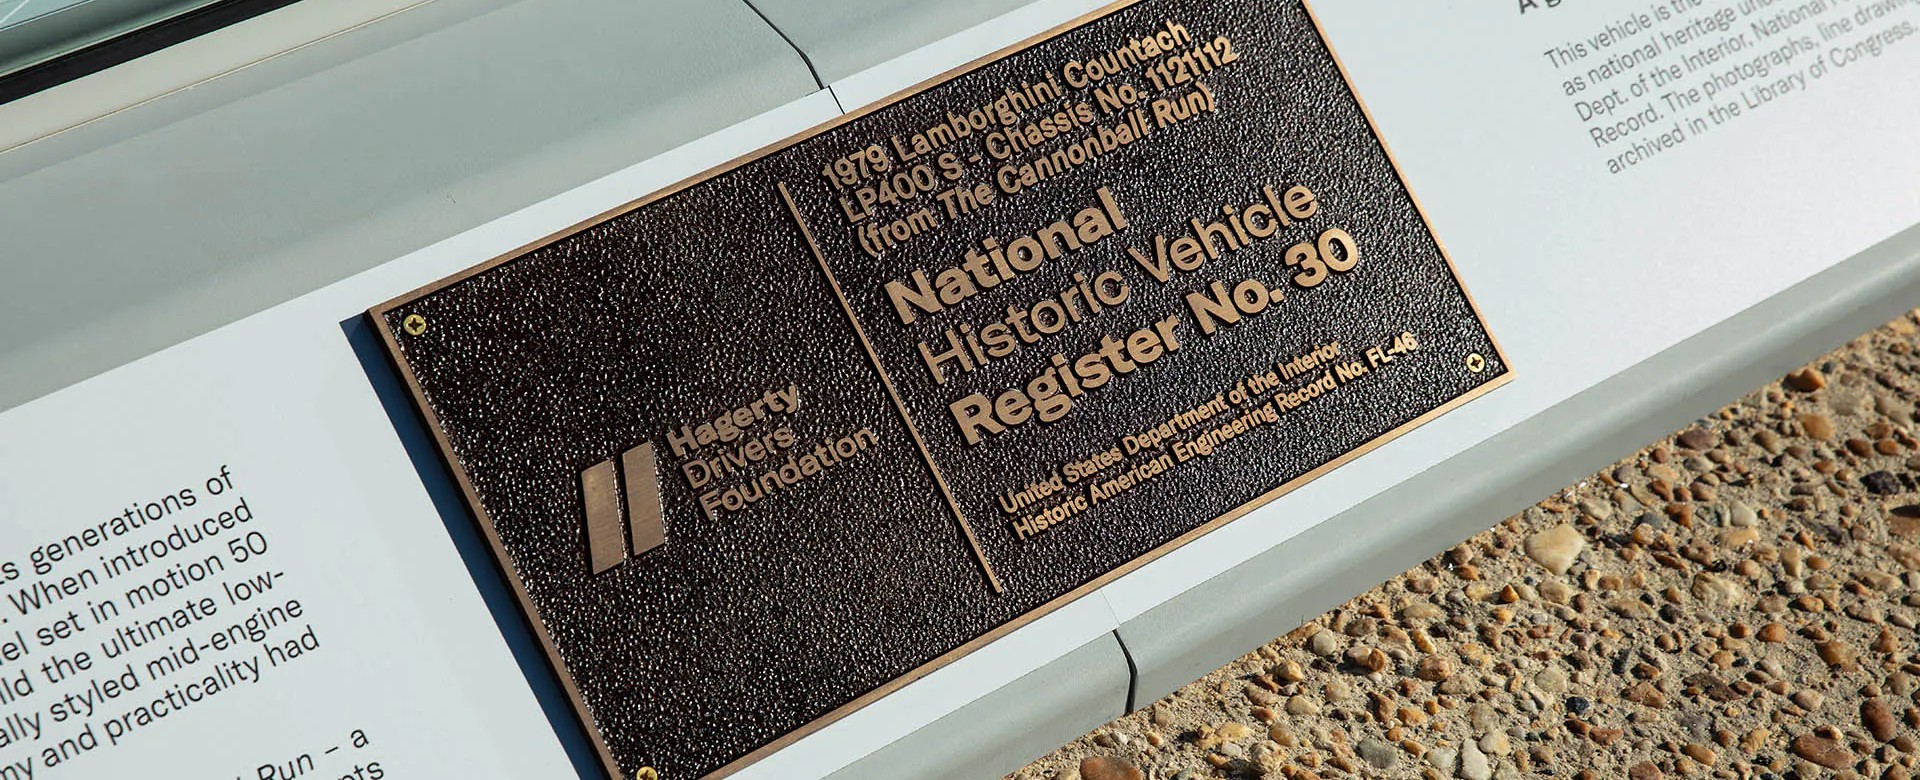 Image of National Historic Vehicle Register placard